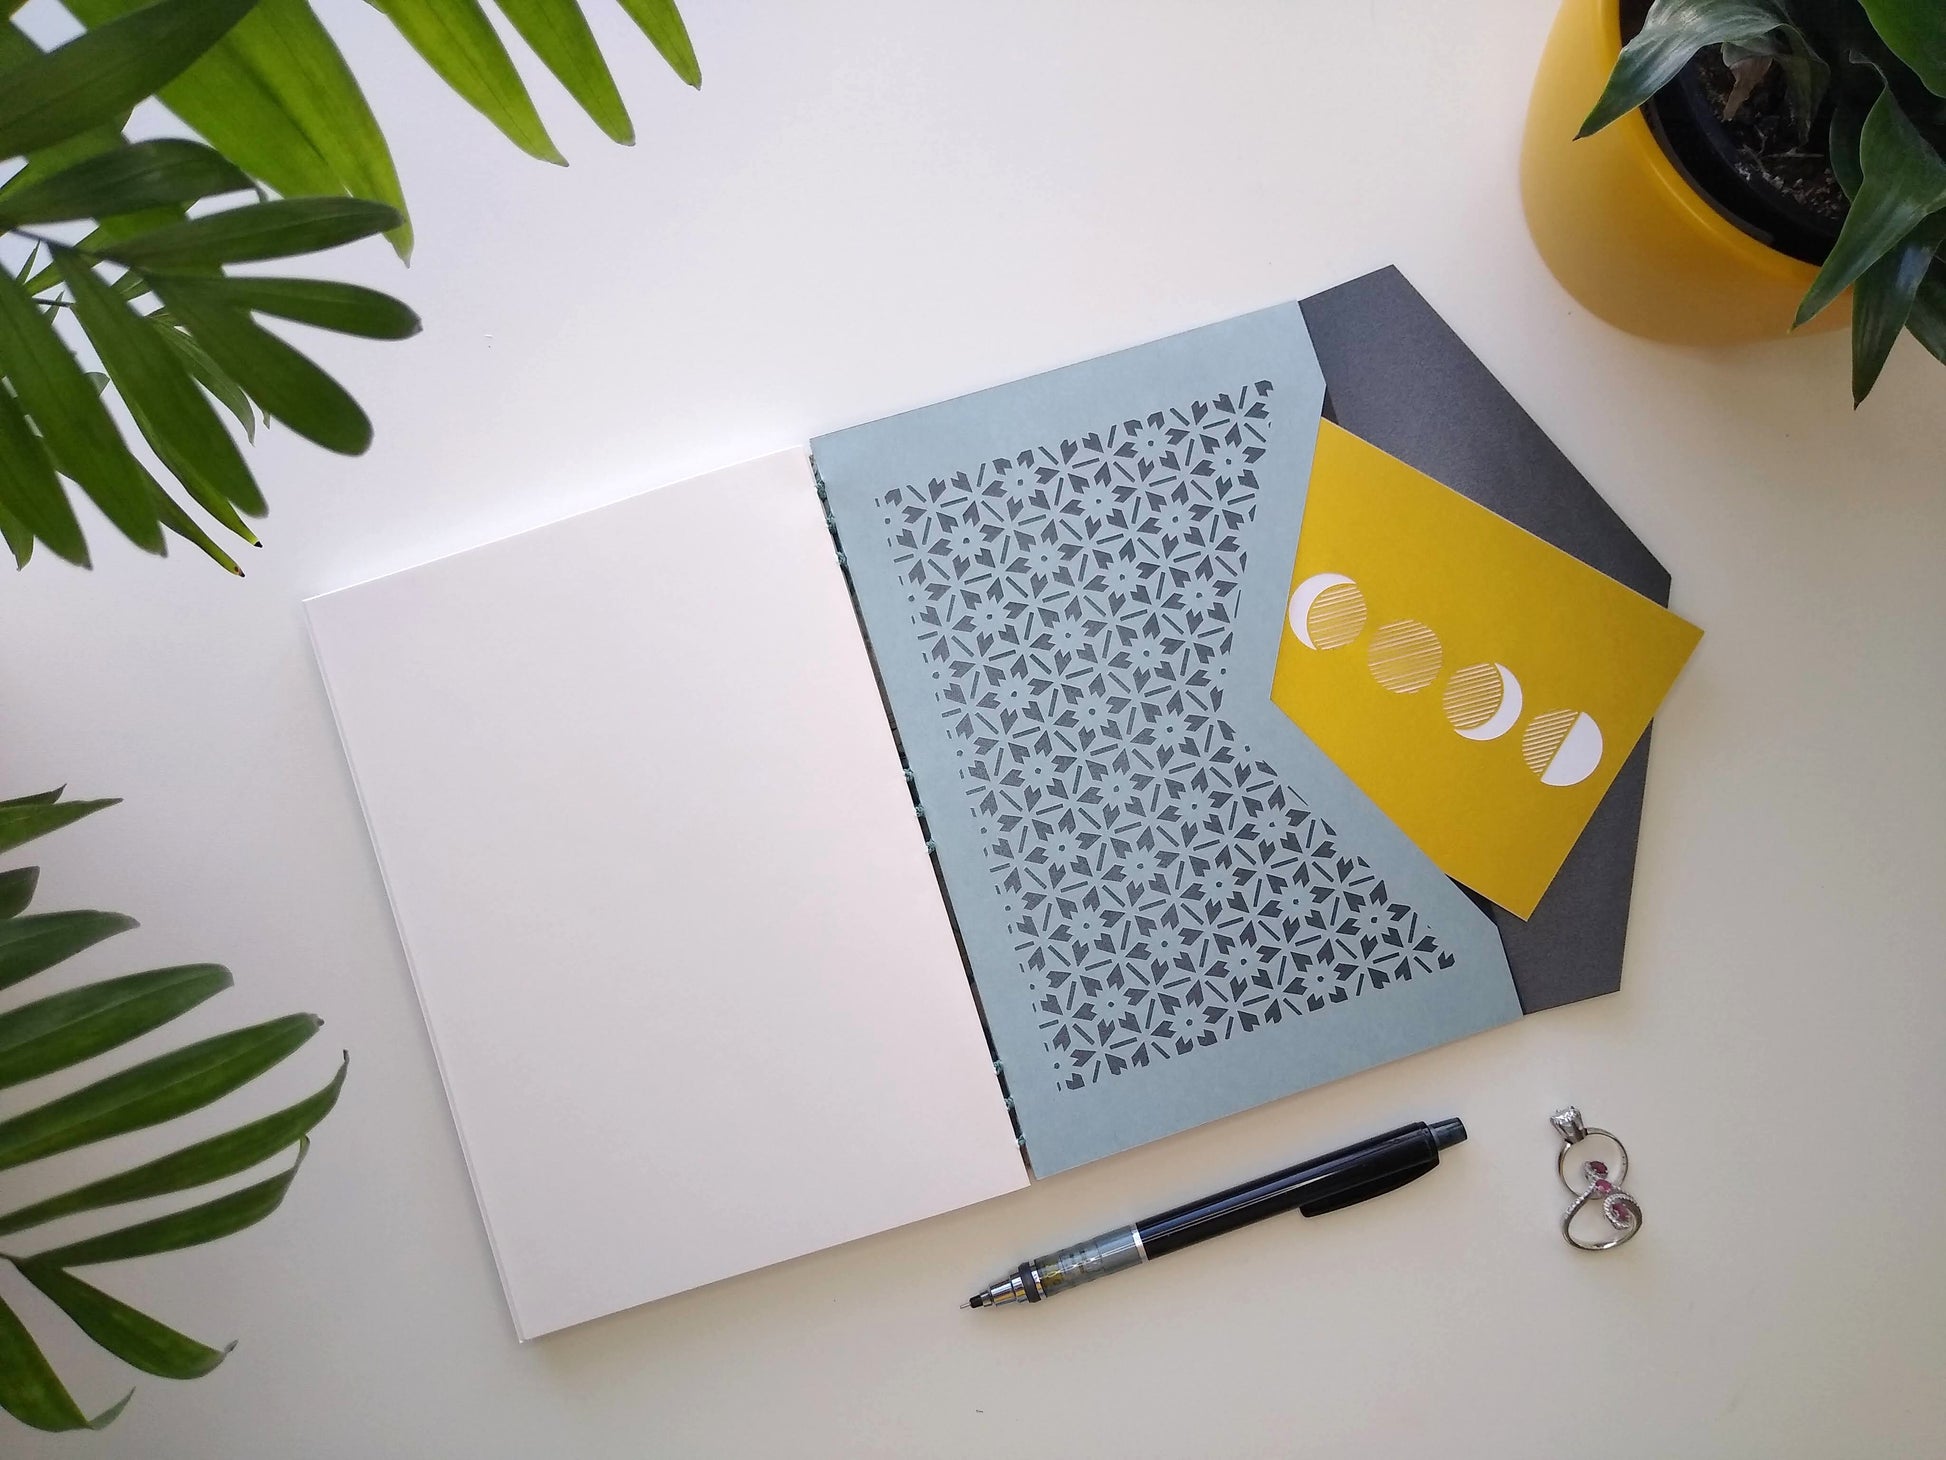 An open journal lays on a white desk next to two potted plants, a pair of rings, and a black mechanical pencil. The journal shows blank white pages on the left side and a blue envelope on the right. The envelope has a floral lattice design cut into it, lined with metallic grey paper. It is open and has a gold, moon phases postcard sticking out of it.